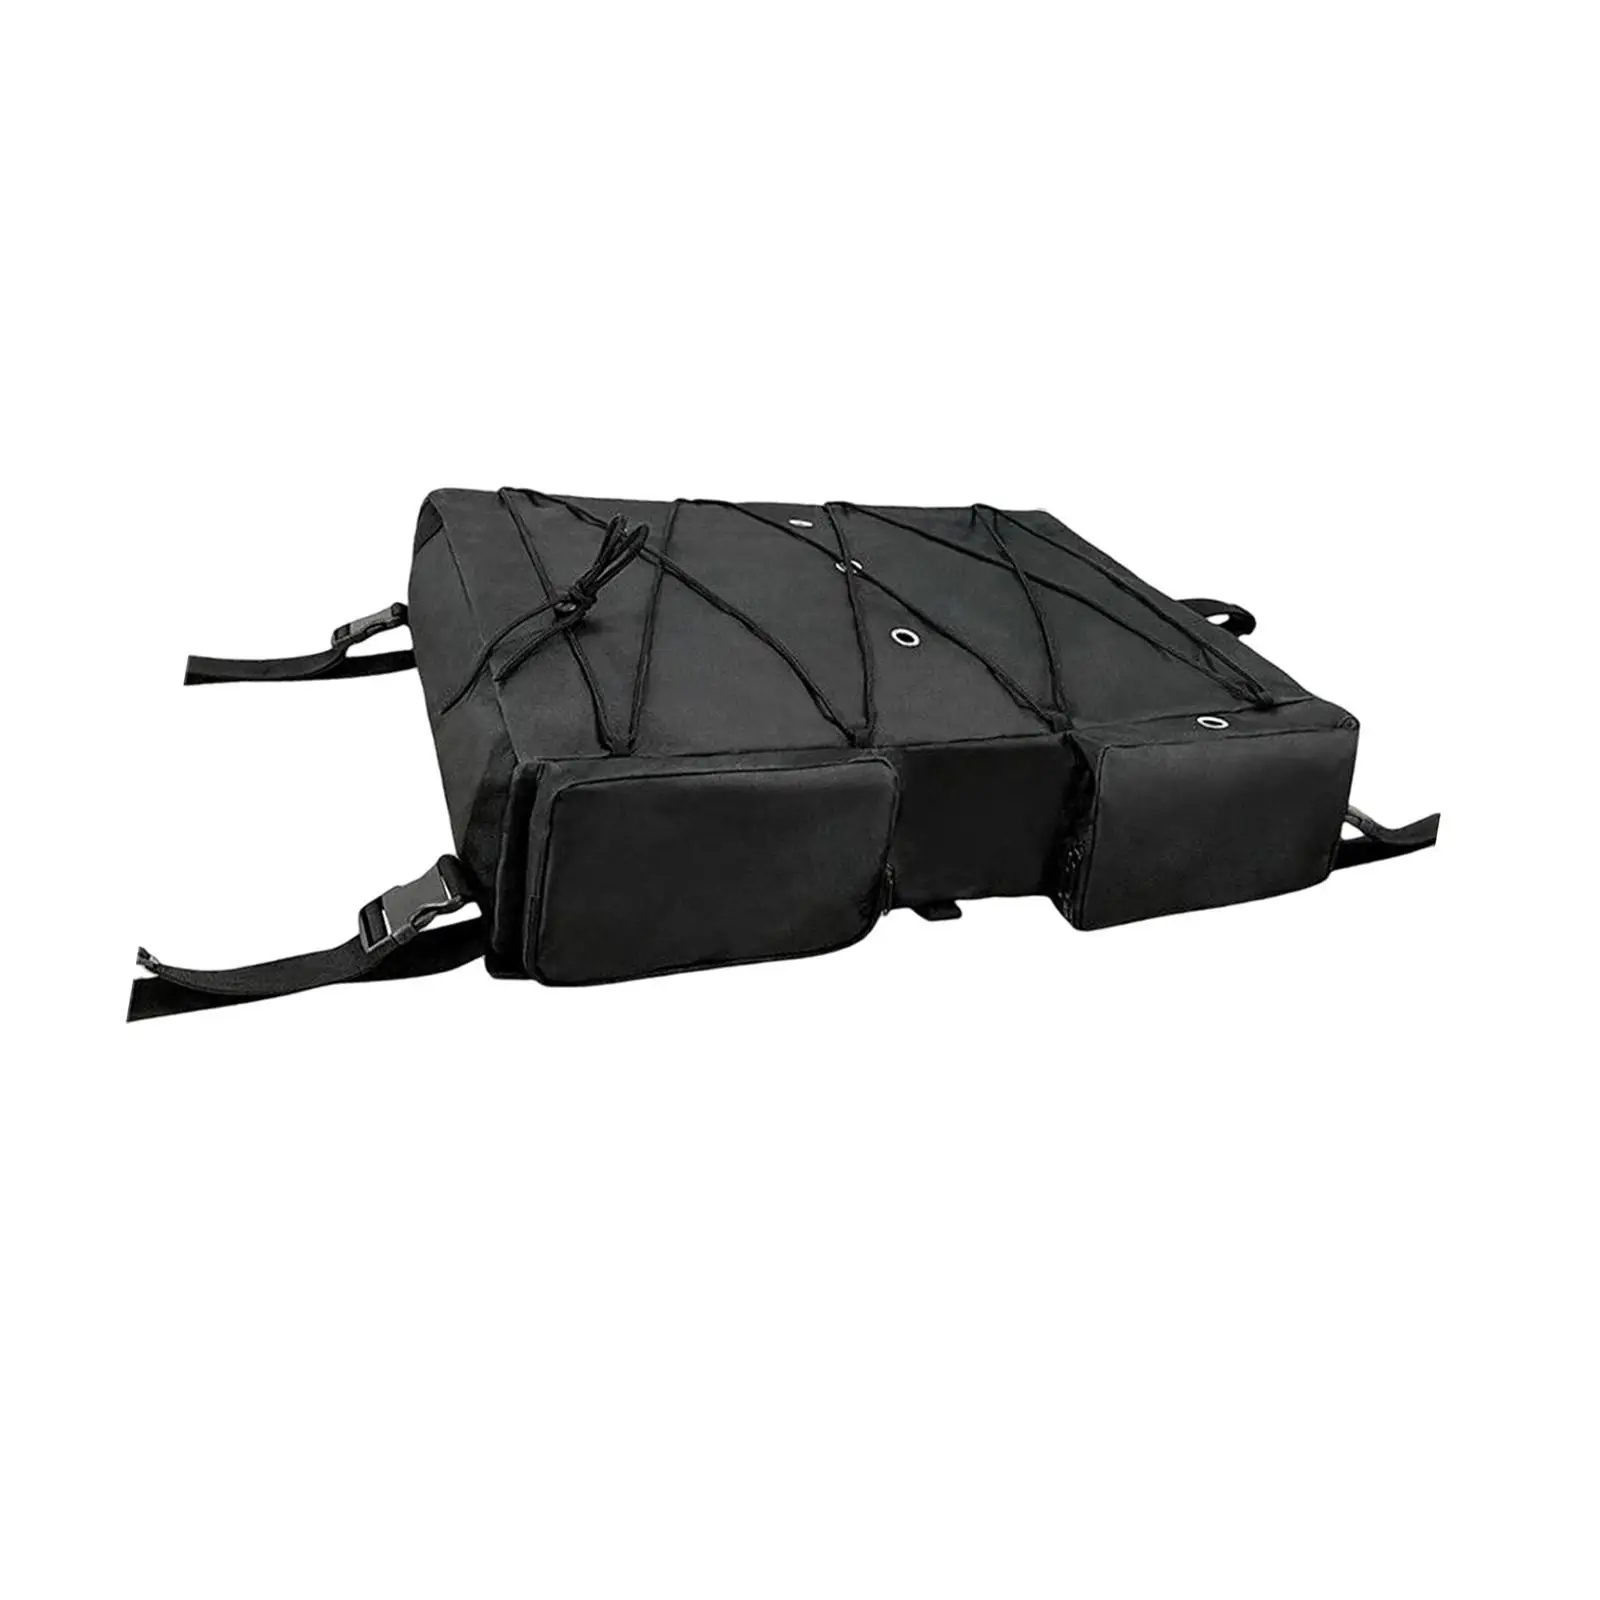 T Bag T Top and Bimini Top Storage Pack Life Jacket Storage Bag for Outdoor